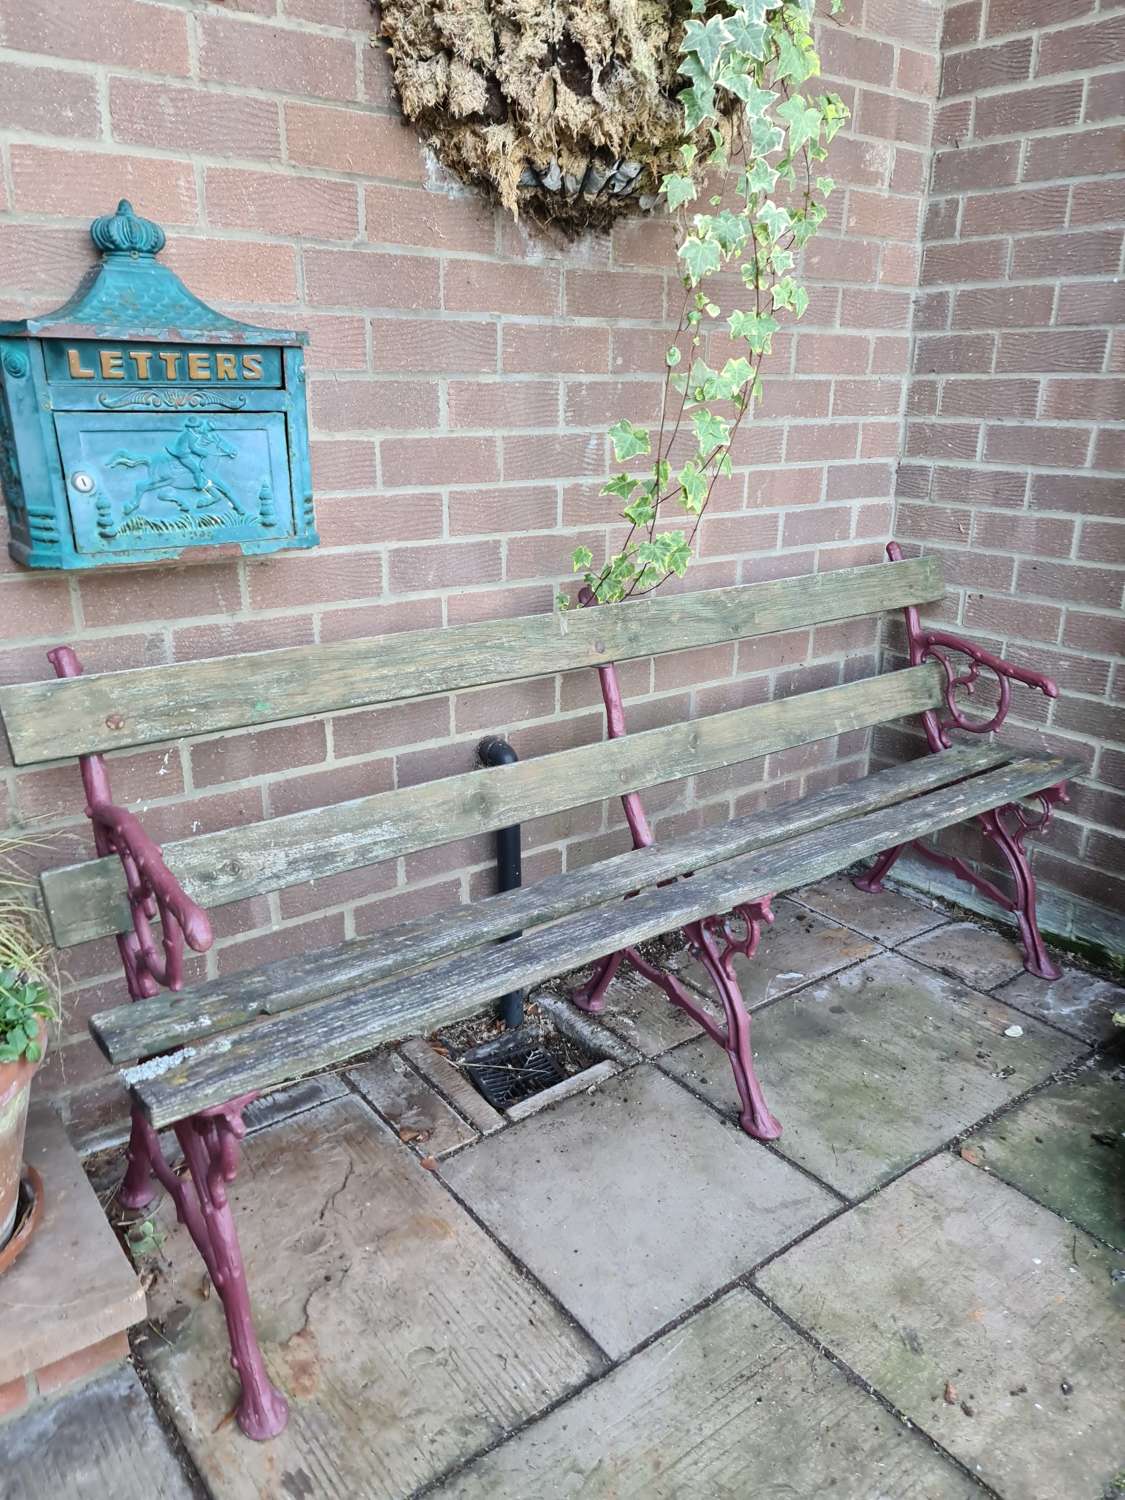 19th Century French Faux Bois Garden Bench